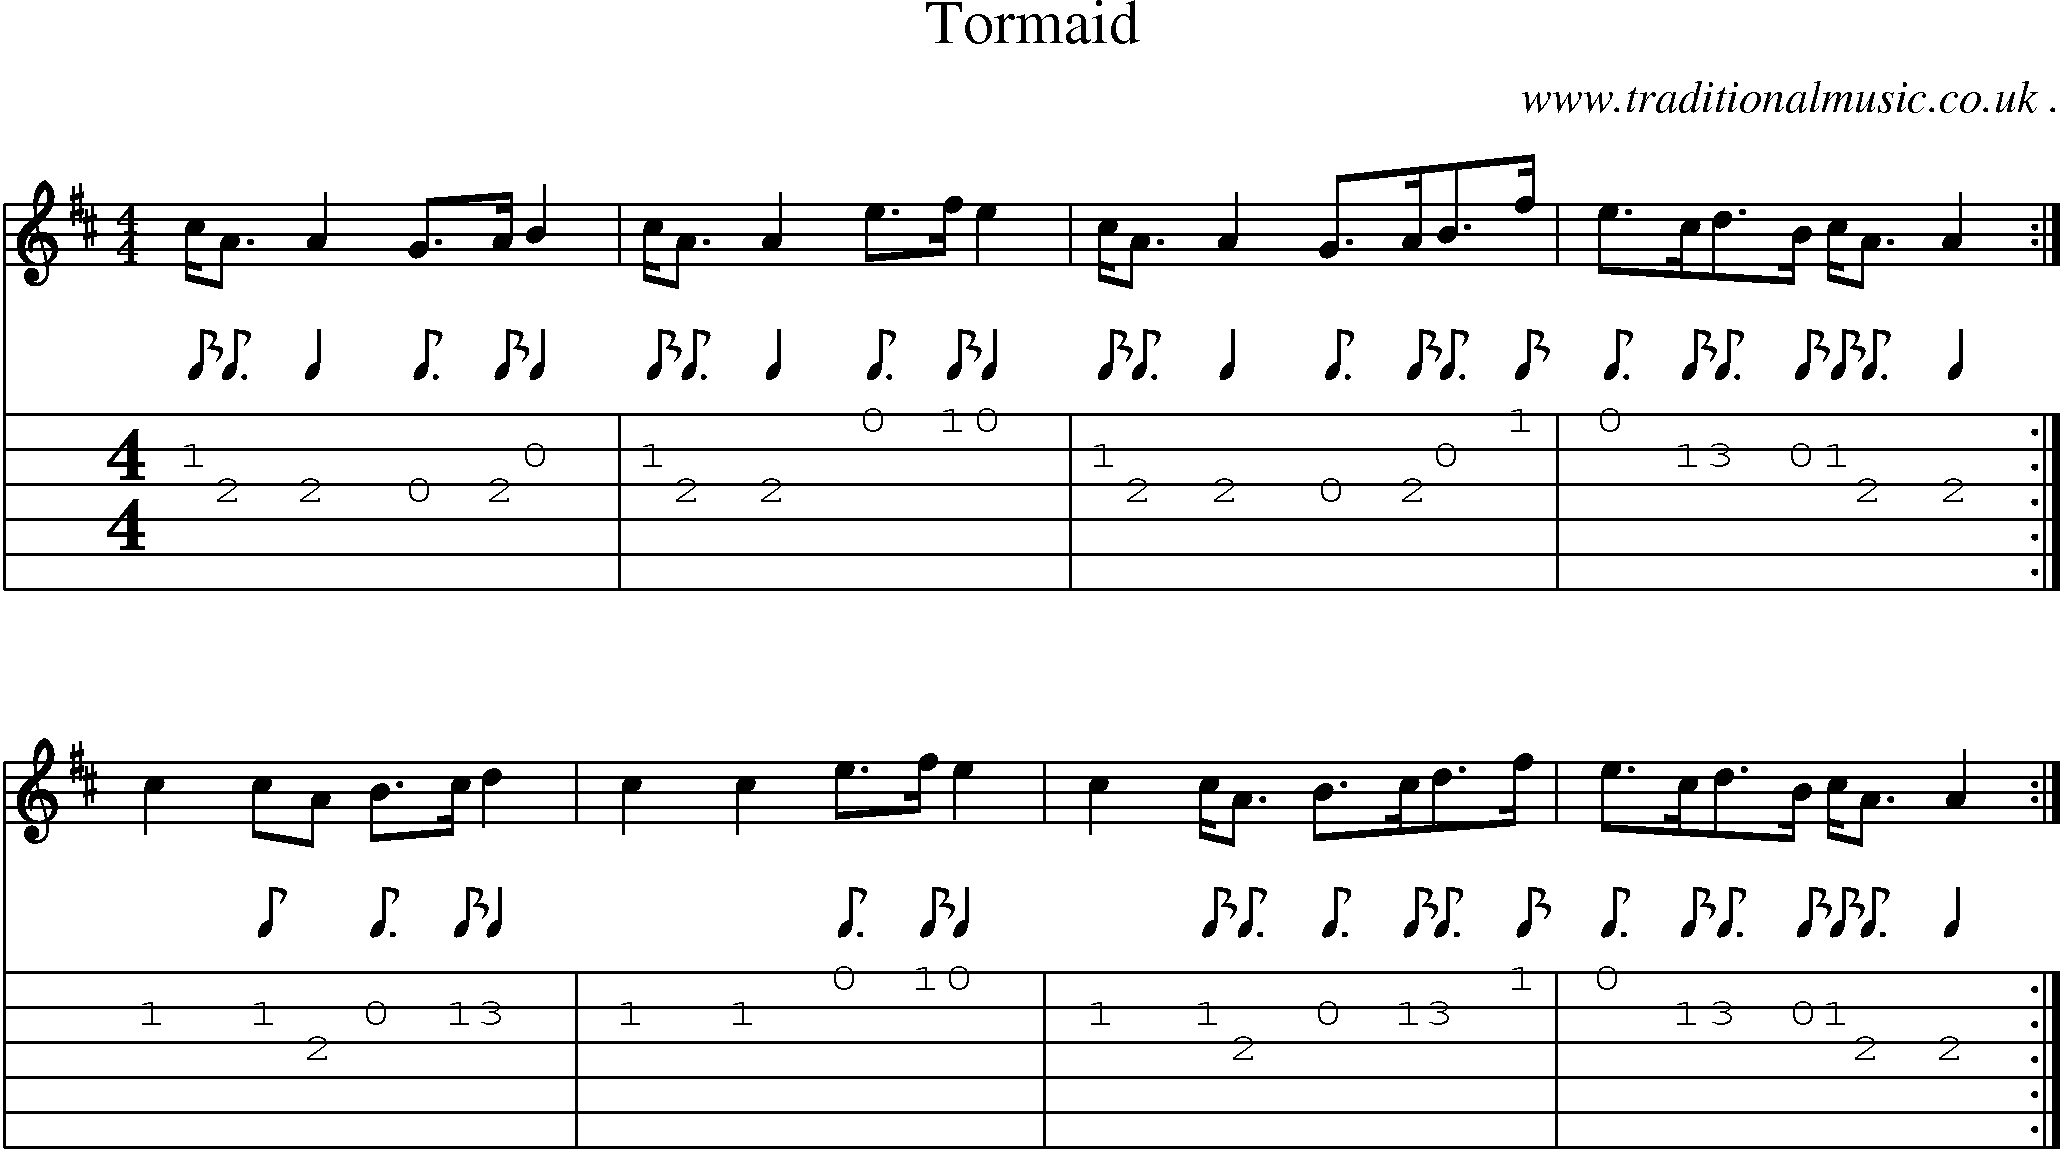 Sheet-music  score, Chords and Guitar Tabs for Tormaid